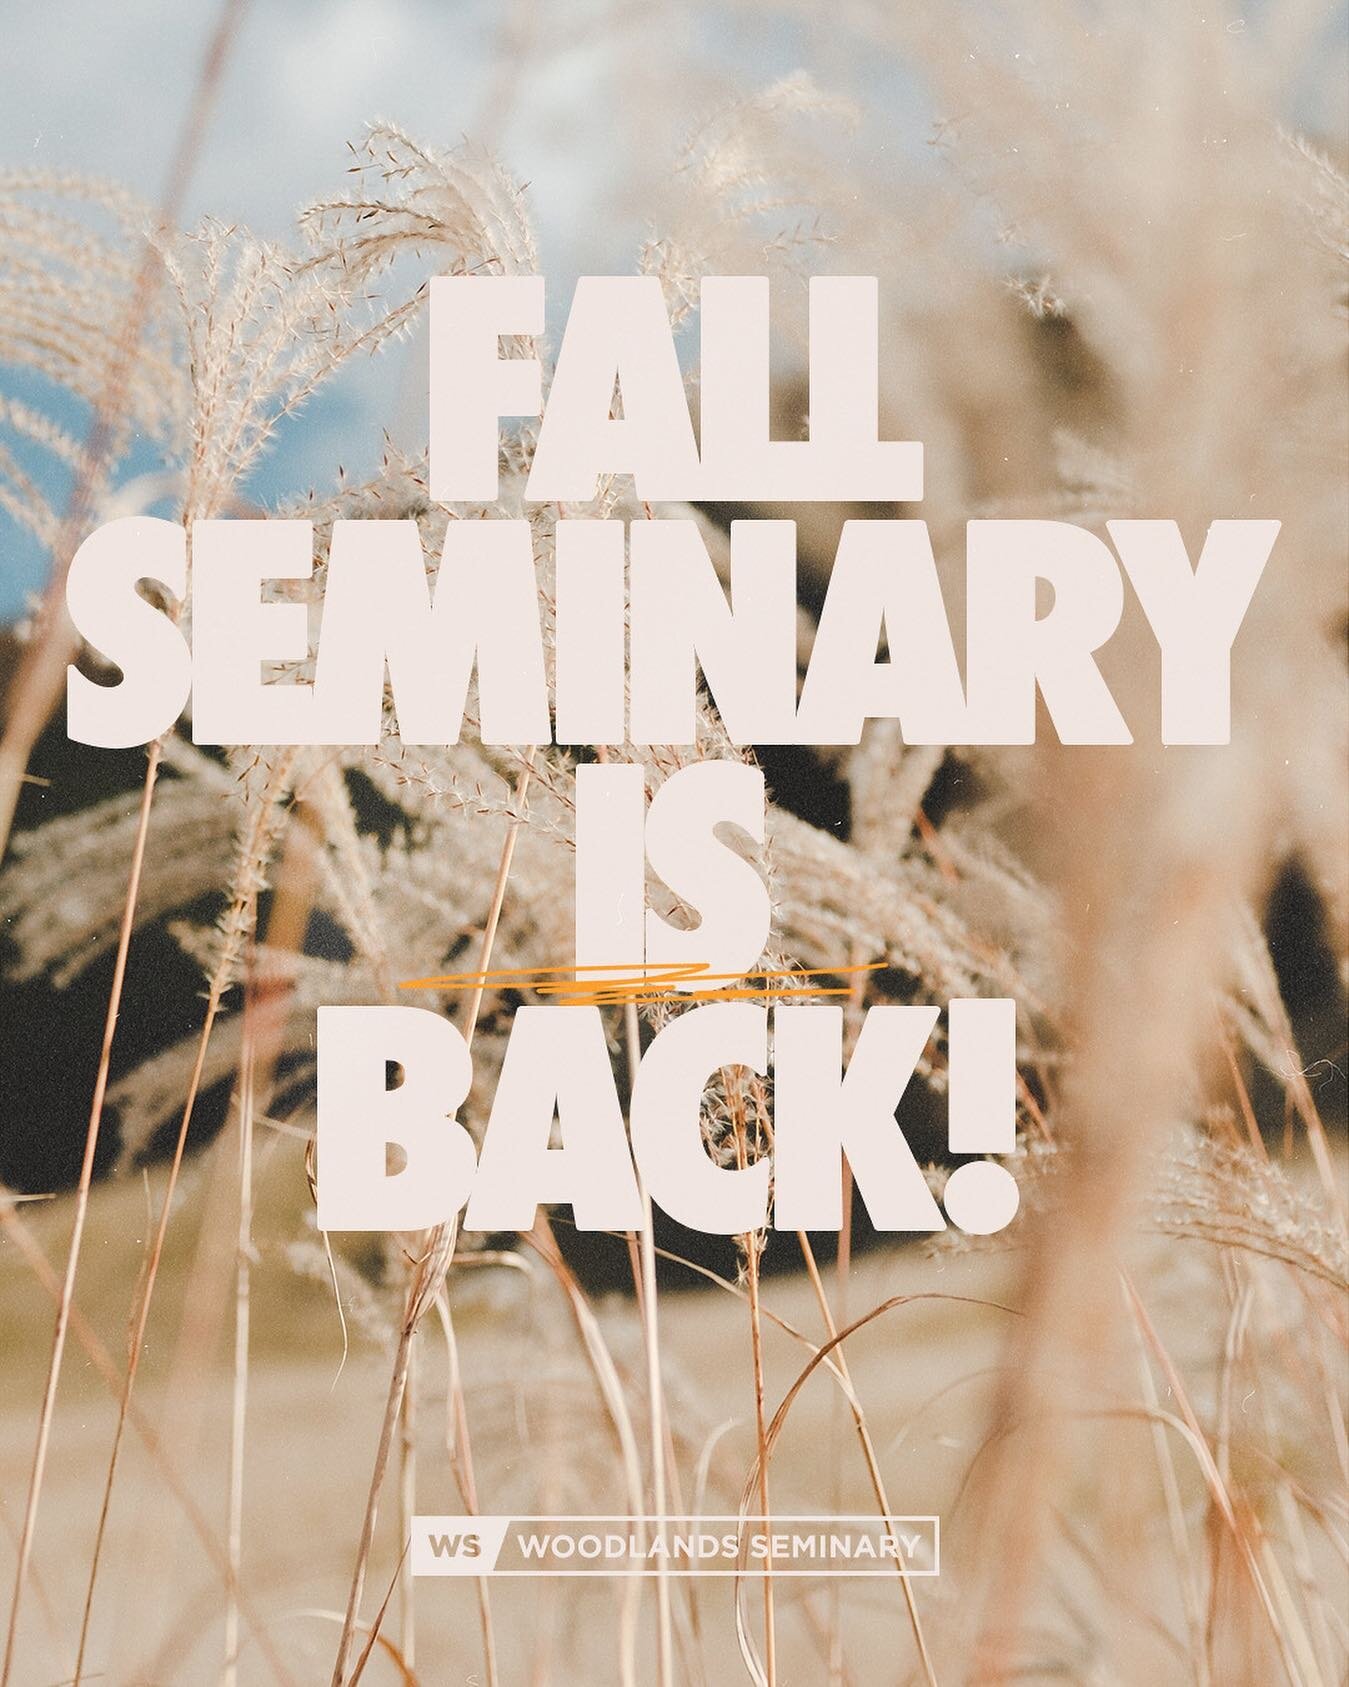 Fall seminary is BACK August 24th! Interested in applying or want to know more? Send us a DM or visit our website woodandsseminary.org